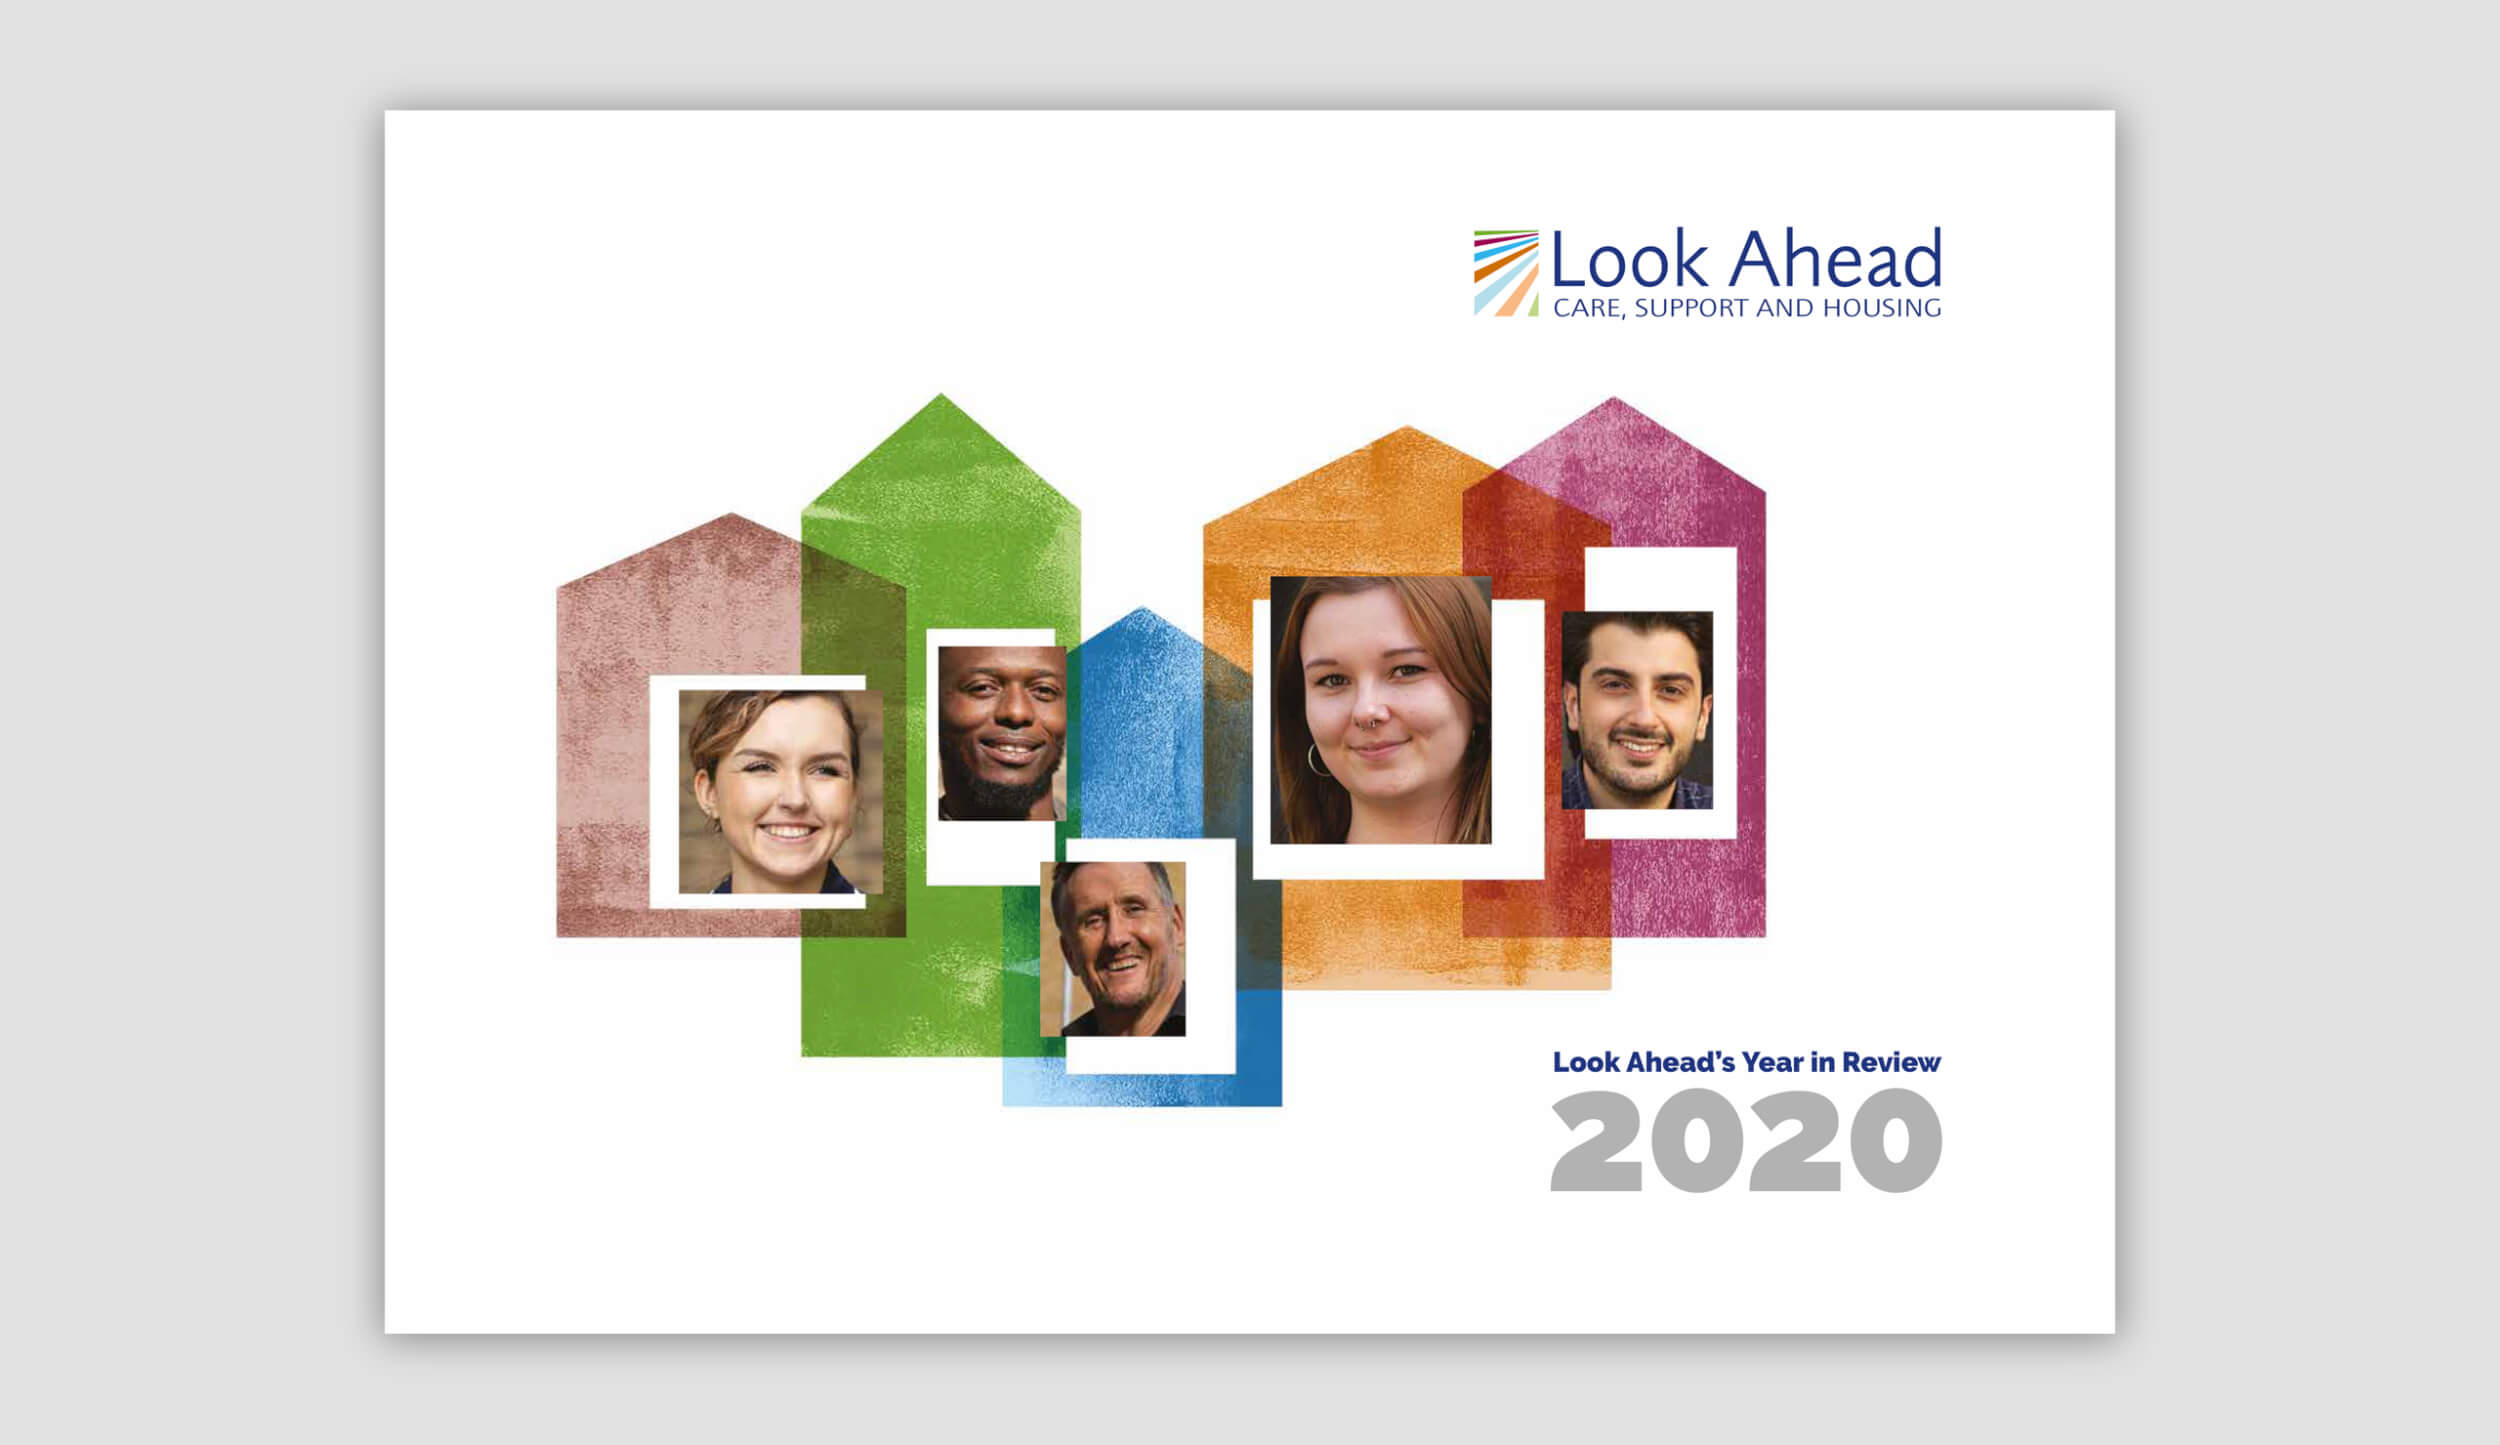 Look Ahead annual review 2020 cover